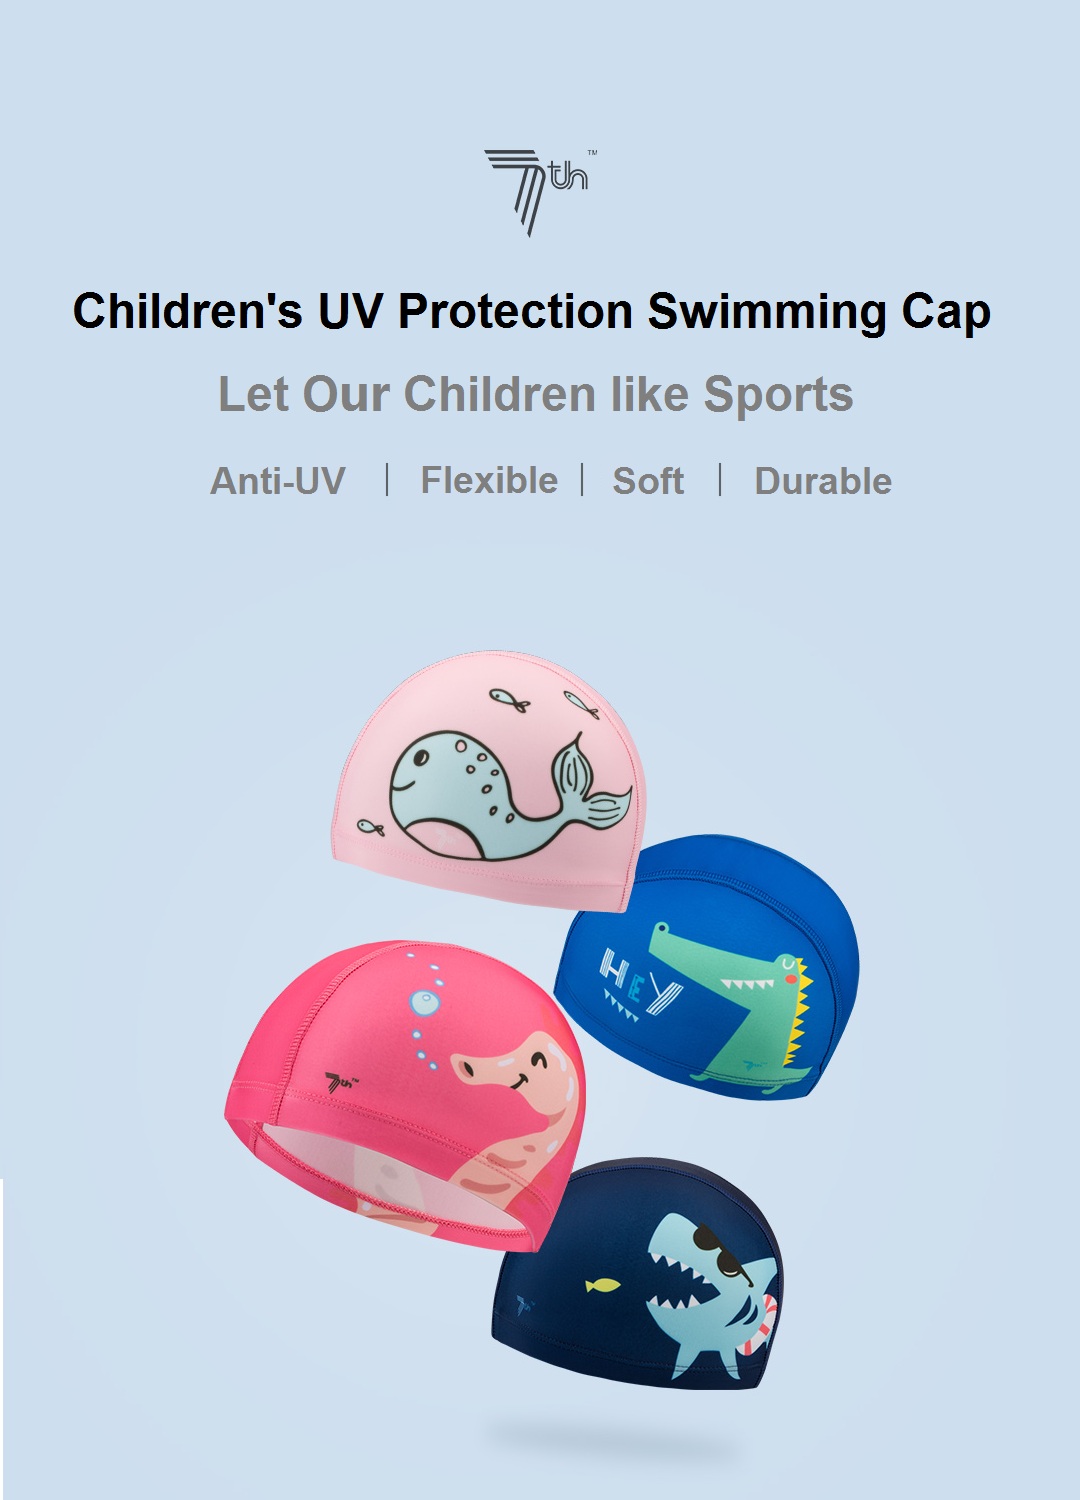 FROM-XIAOMI-YOUPIN-7th-Childrens-Swimming-Cap-Anti-UV-Flexible-Soft-Durble-Quick-Drying-Swim-Protect-1472565-1